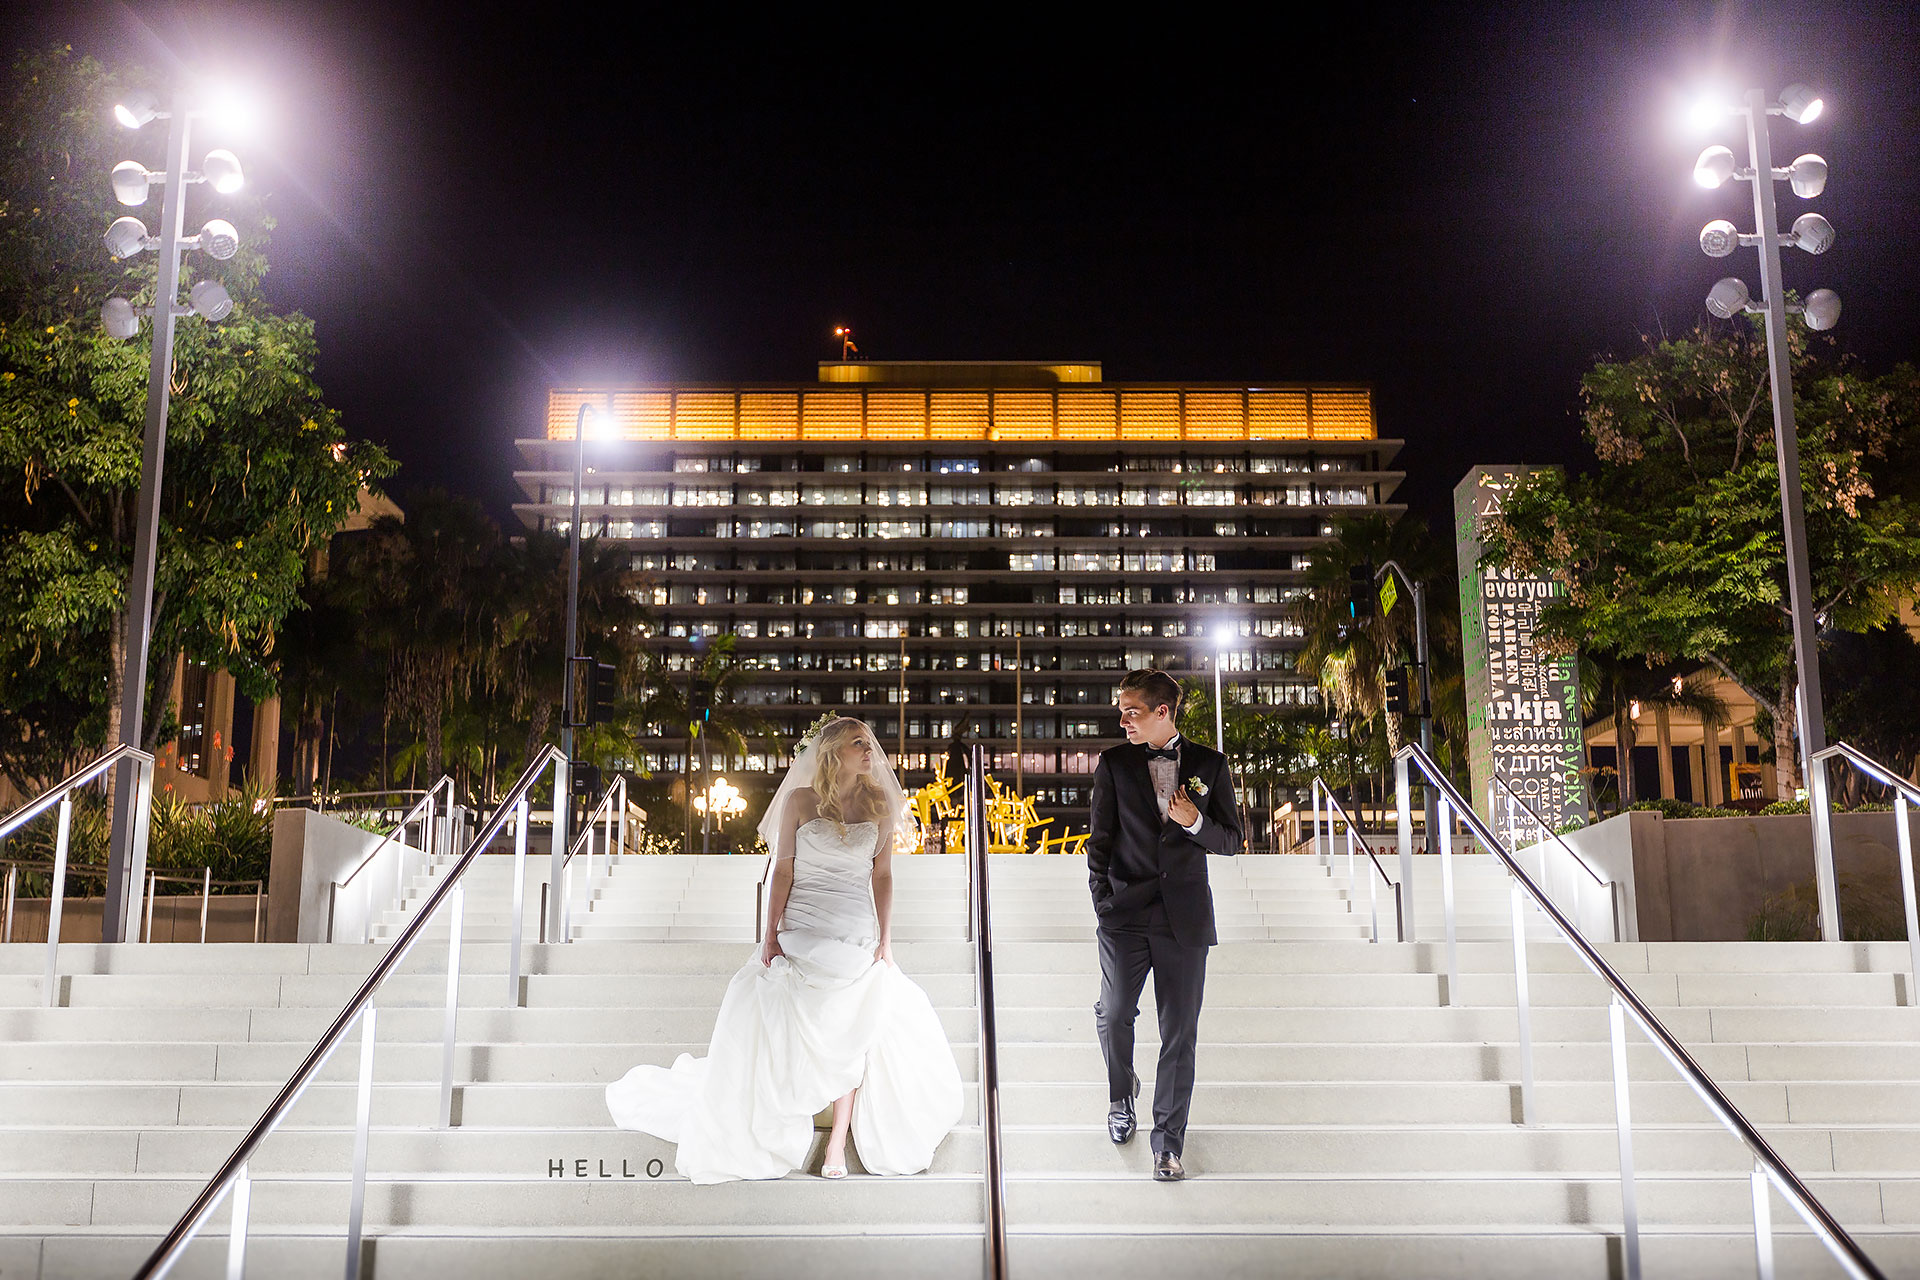 A wedding couple on steps at night captured by photographer Thomas Kim.